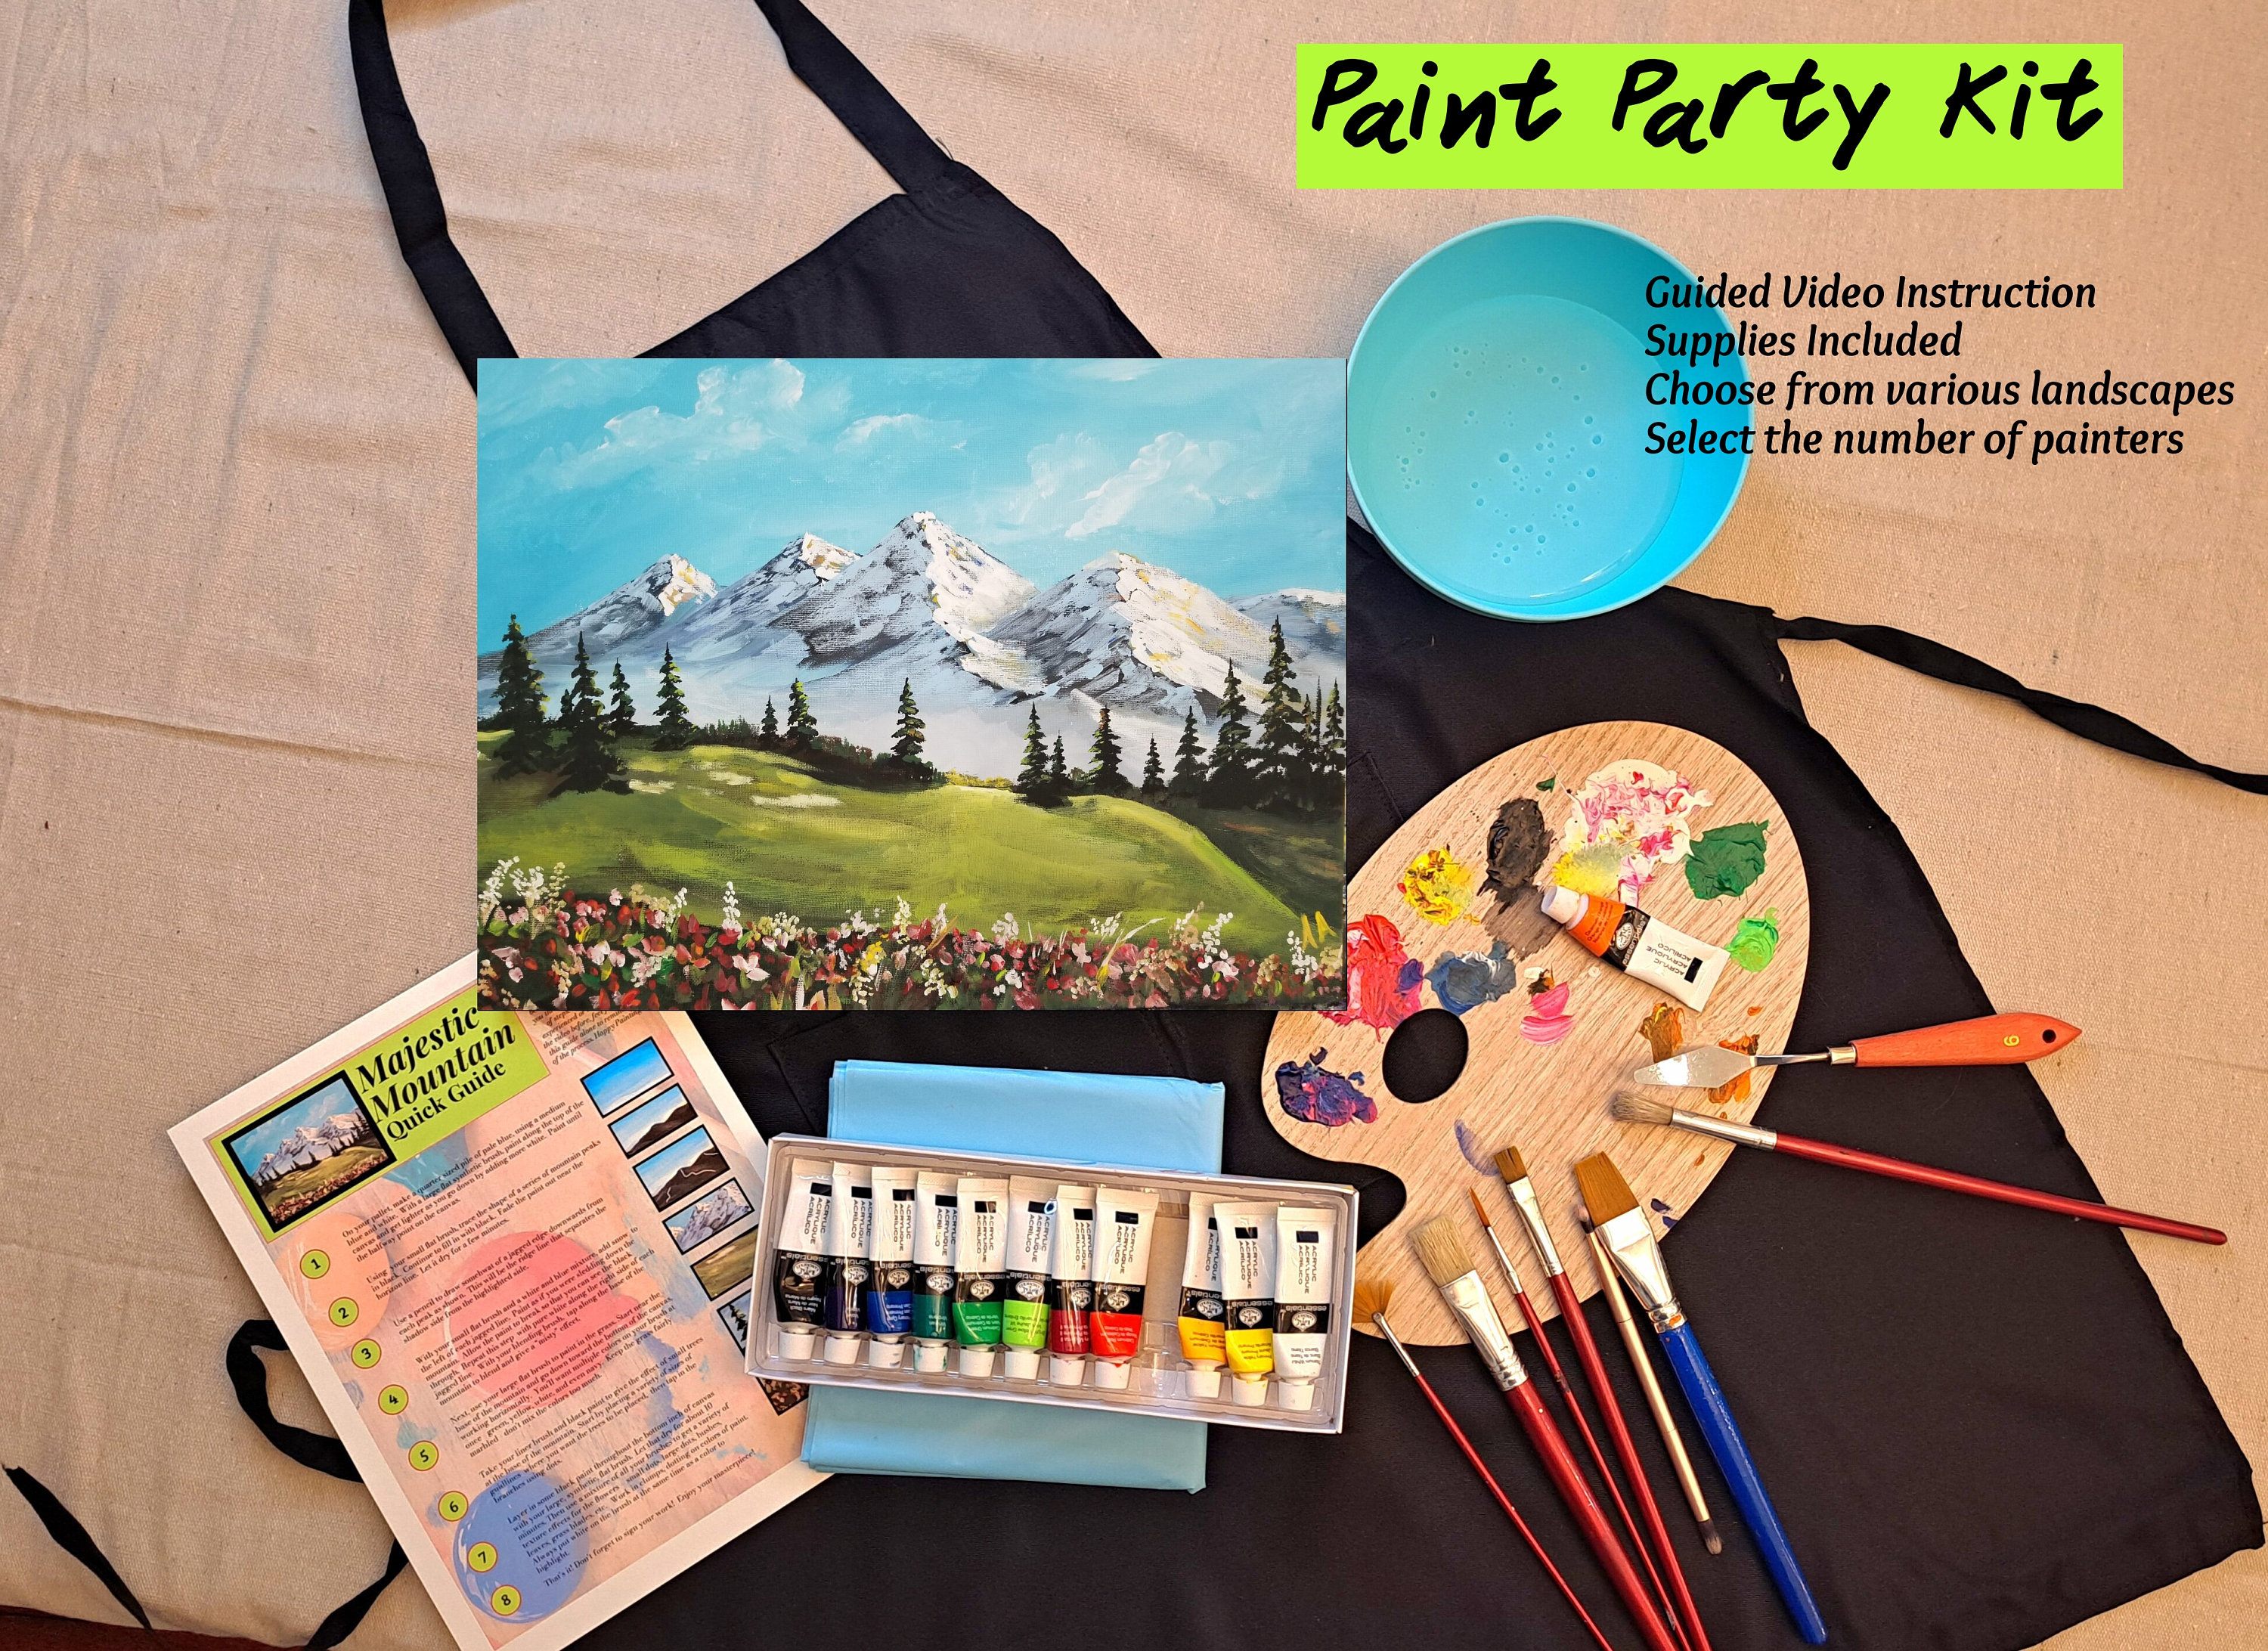 Paint Party Kit, Group Painting, Date Night Painting, Paint